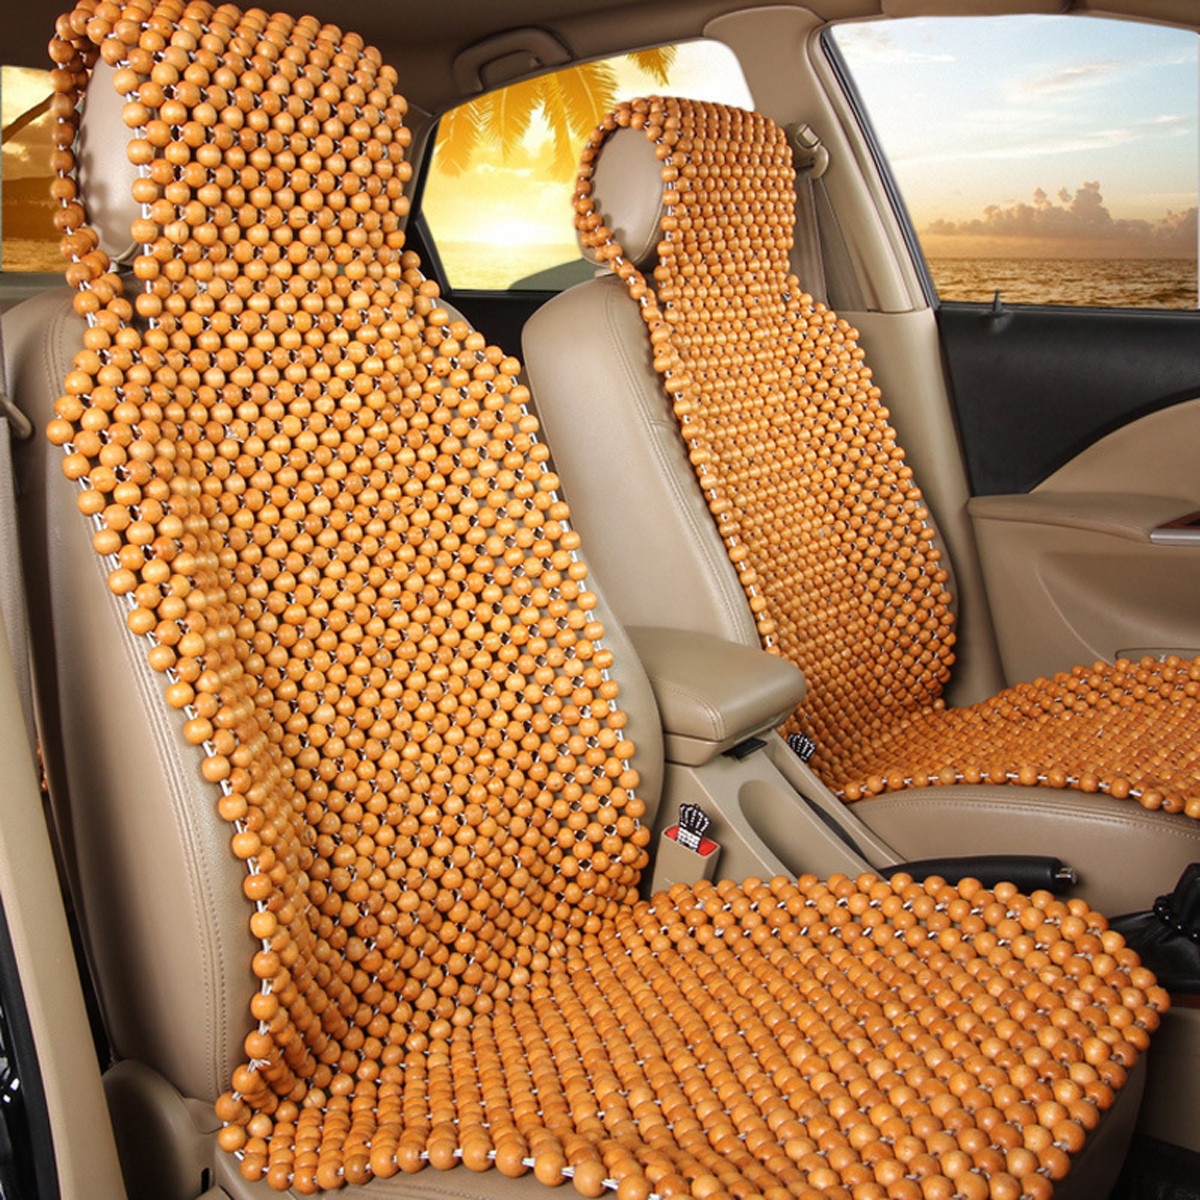 Where to buy the best Car Seat Bead?